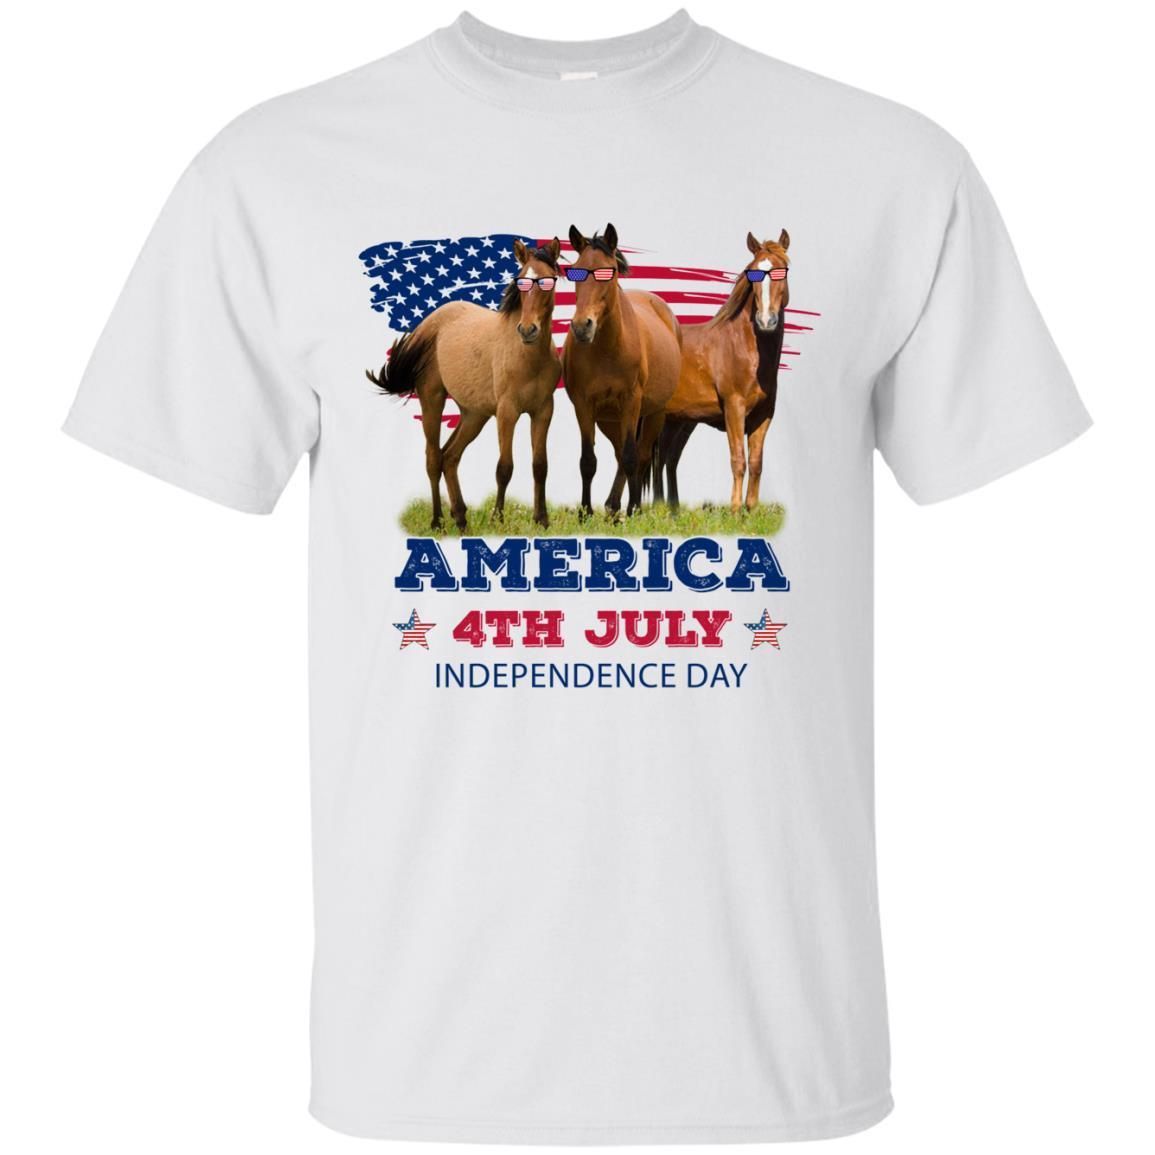 Horses celebrate Independence Day July4th